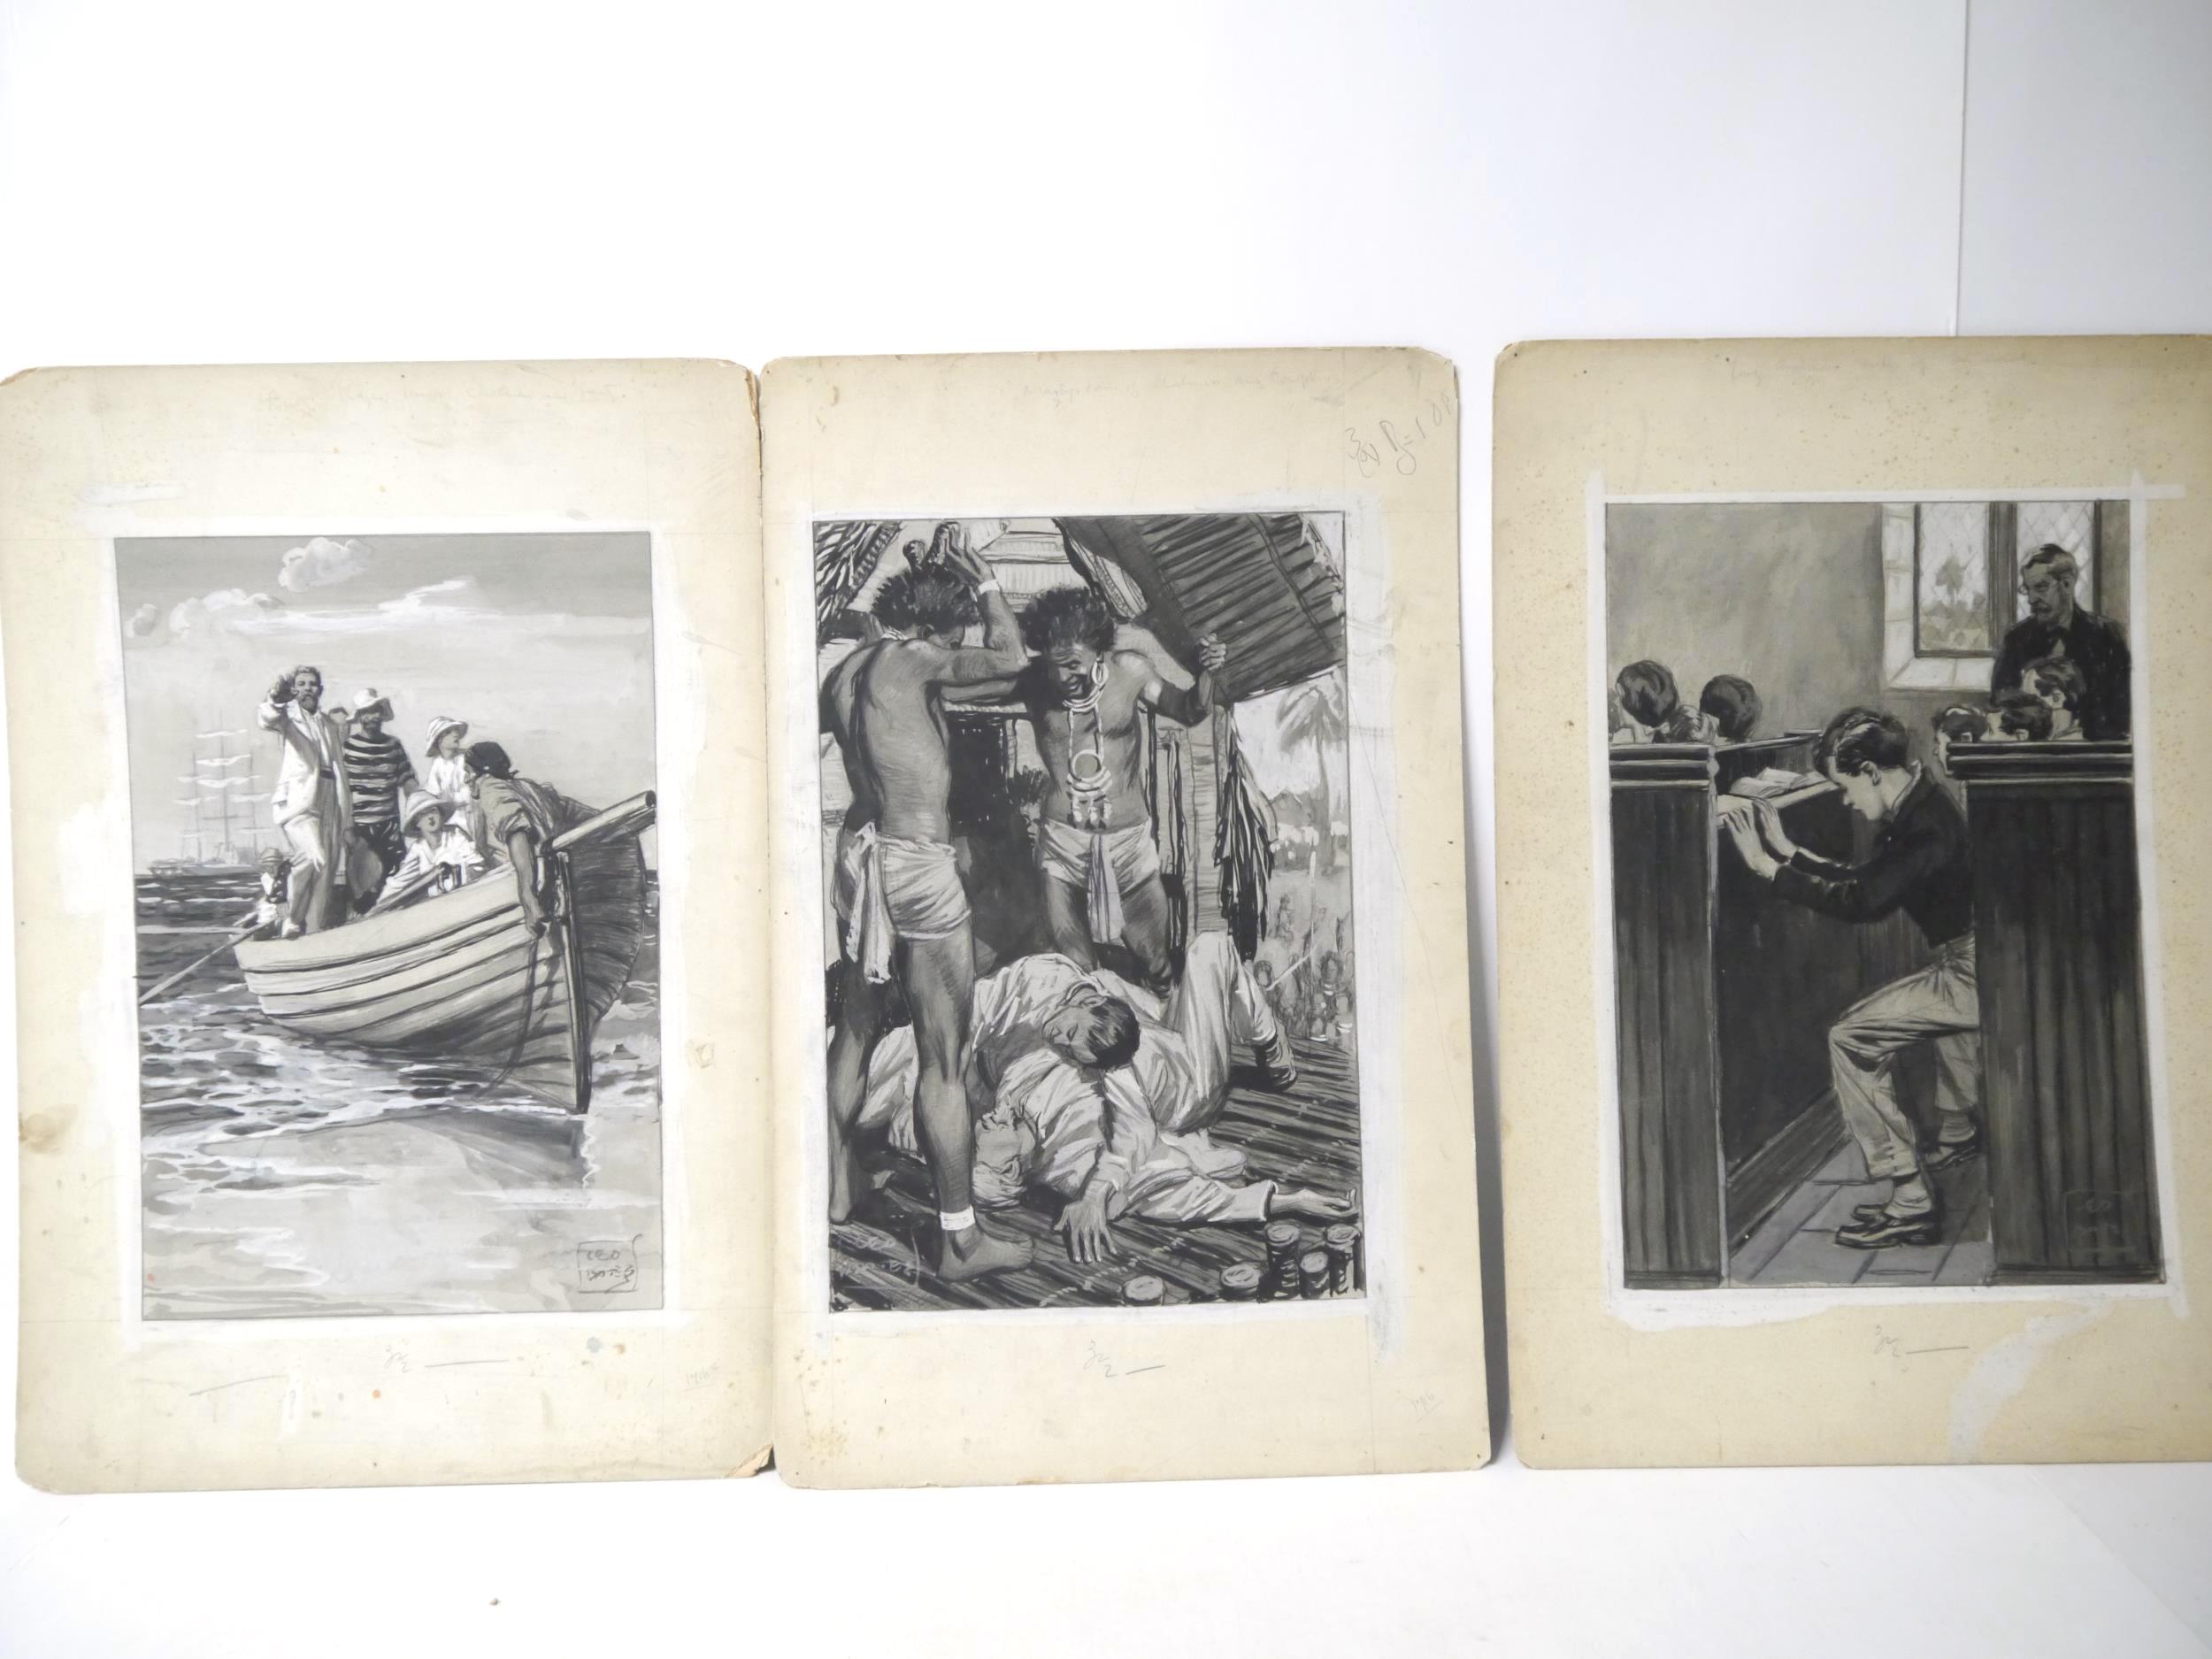 LEO BATES (1890-1957), three original pen, ink and wash illustrations on board, all appear to be